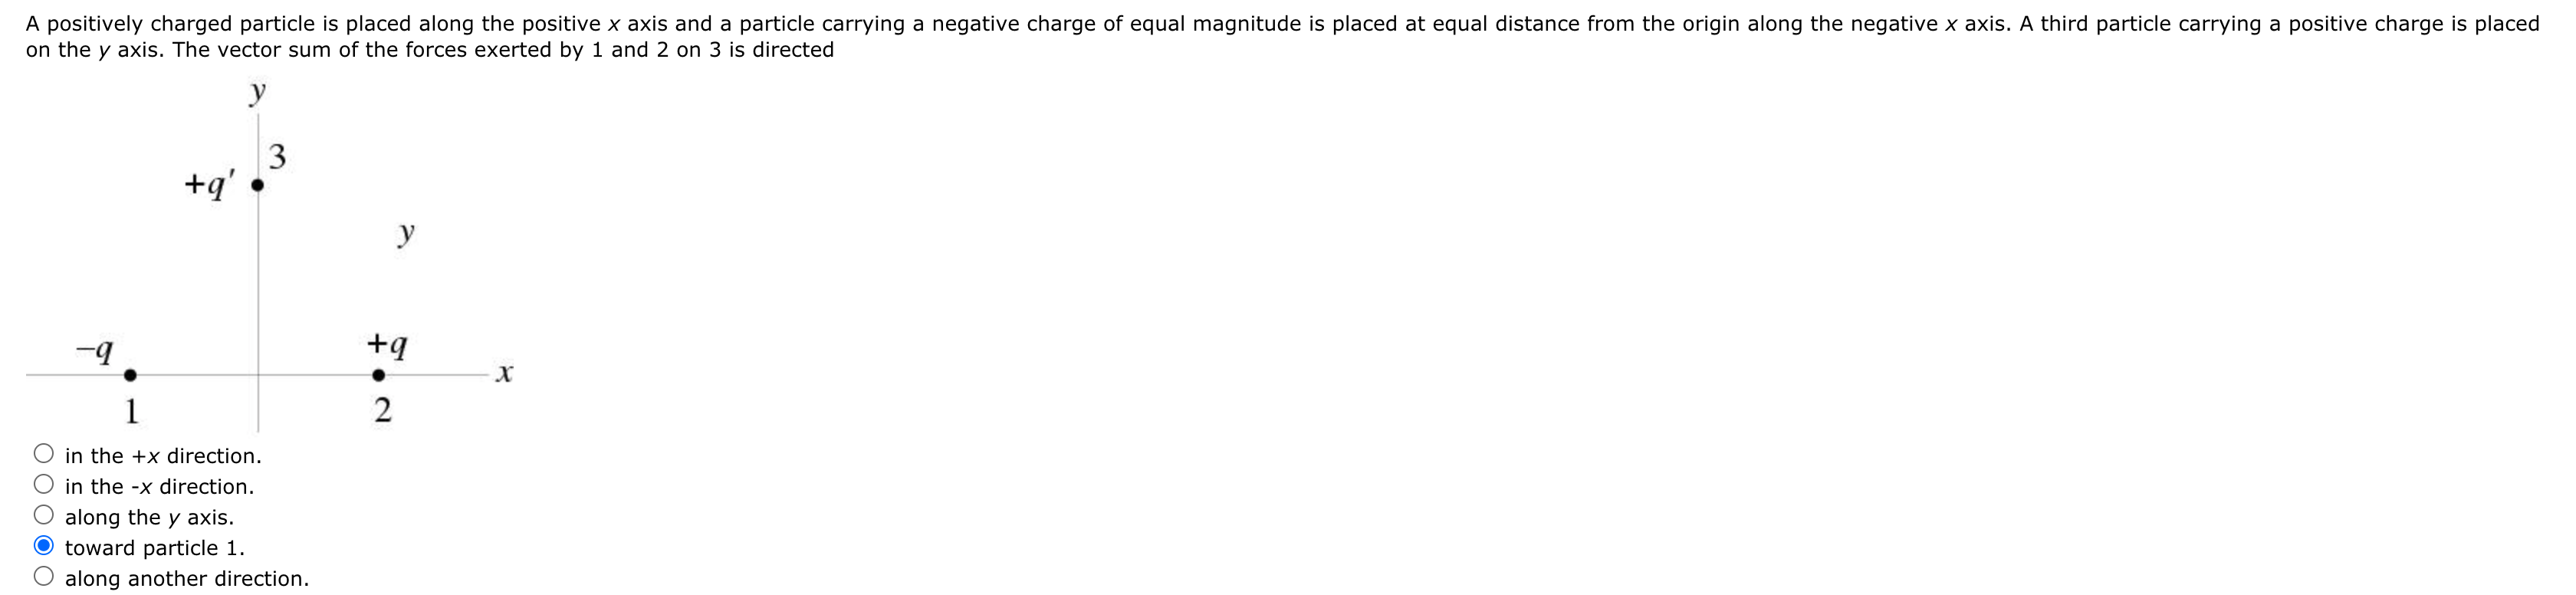 A positively charged particle is placed along the positive x axis and a particle carrying a negative charge of equal magnitude is placed at equal distance from the origin along the negative x axis. A third particle carrying a positive charge is placed
on the y axis. The vector sum of the forces exerted by 1 and 2 on 3 is directed
y
3
+q'
y
1
in the +x direction.
in the -x direction.
along the y axis.
toward particle 1.
along another direction.
